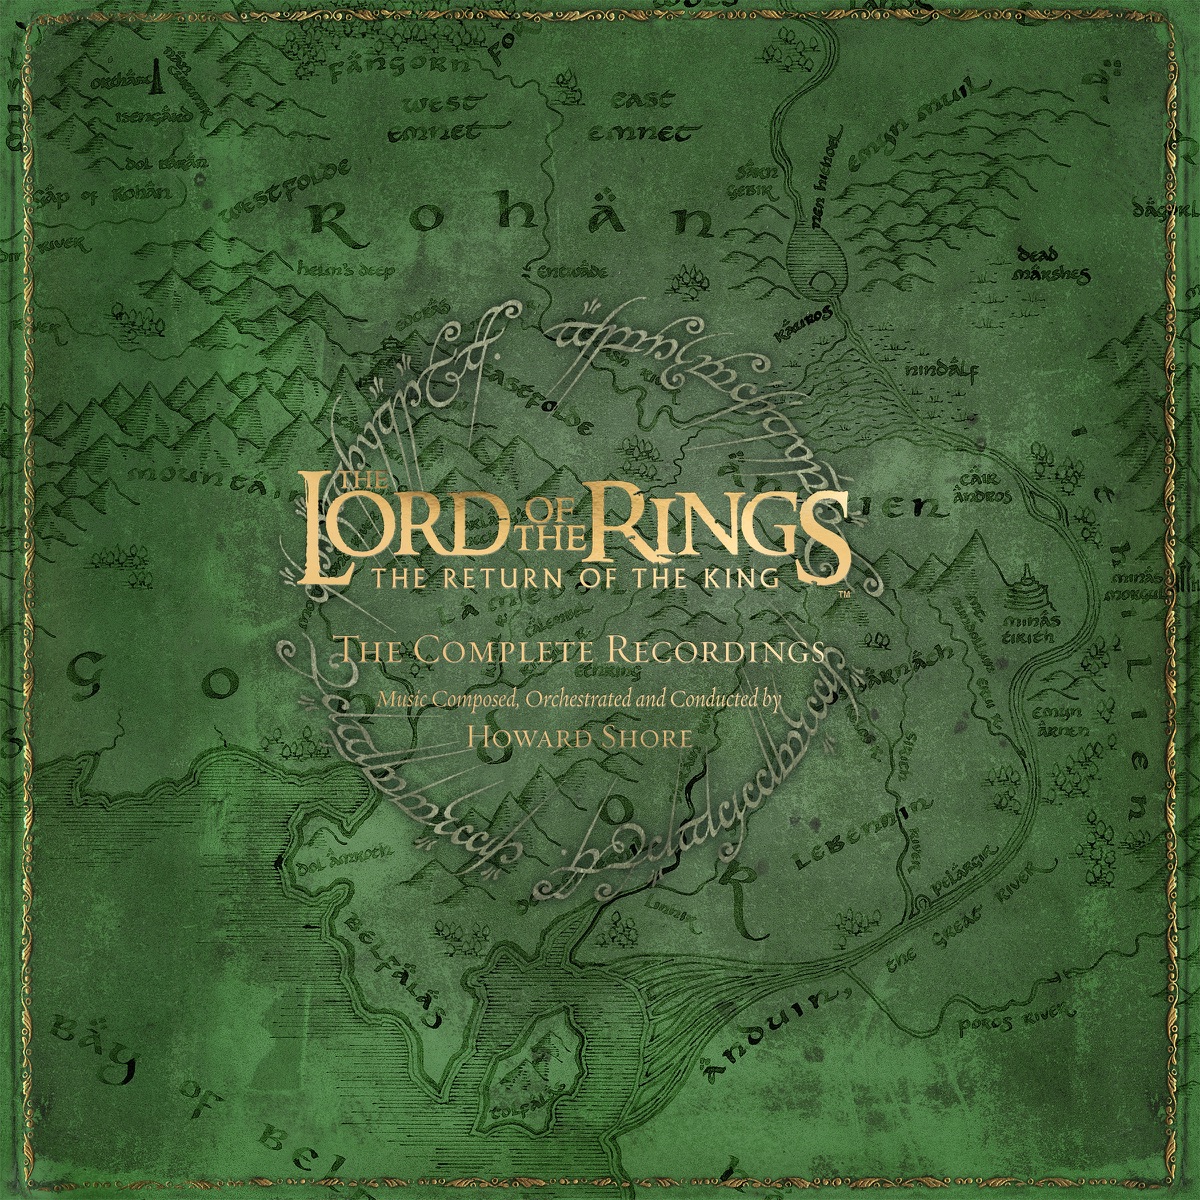 The Lord of the Rings: The Two Towers (The Complete Recordings) by Howard  Shore on Apple Music